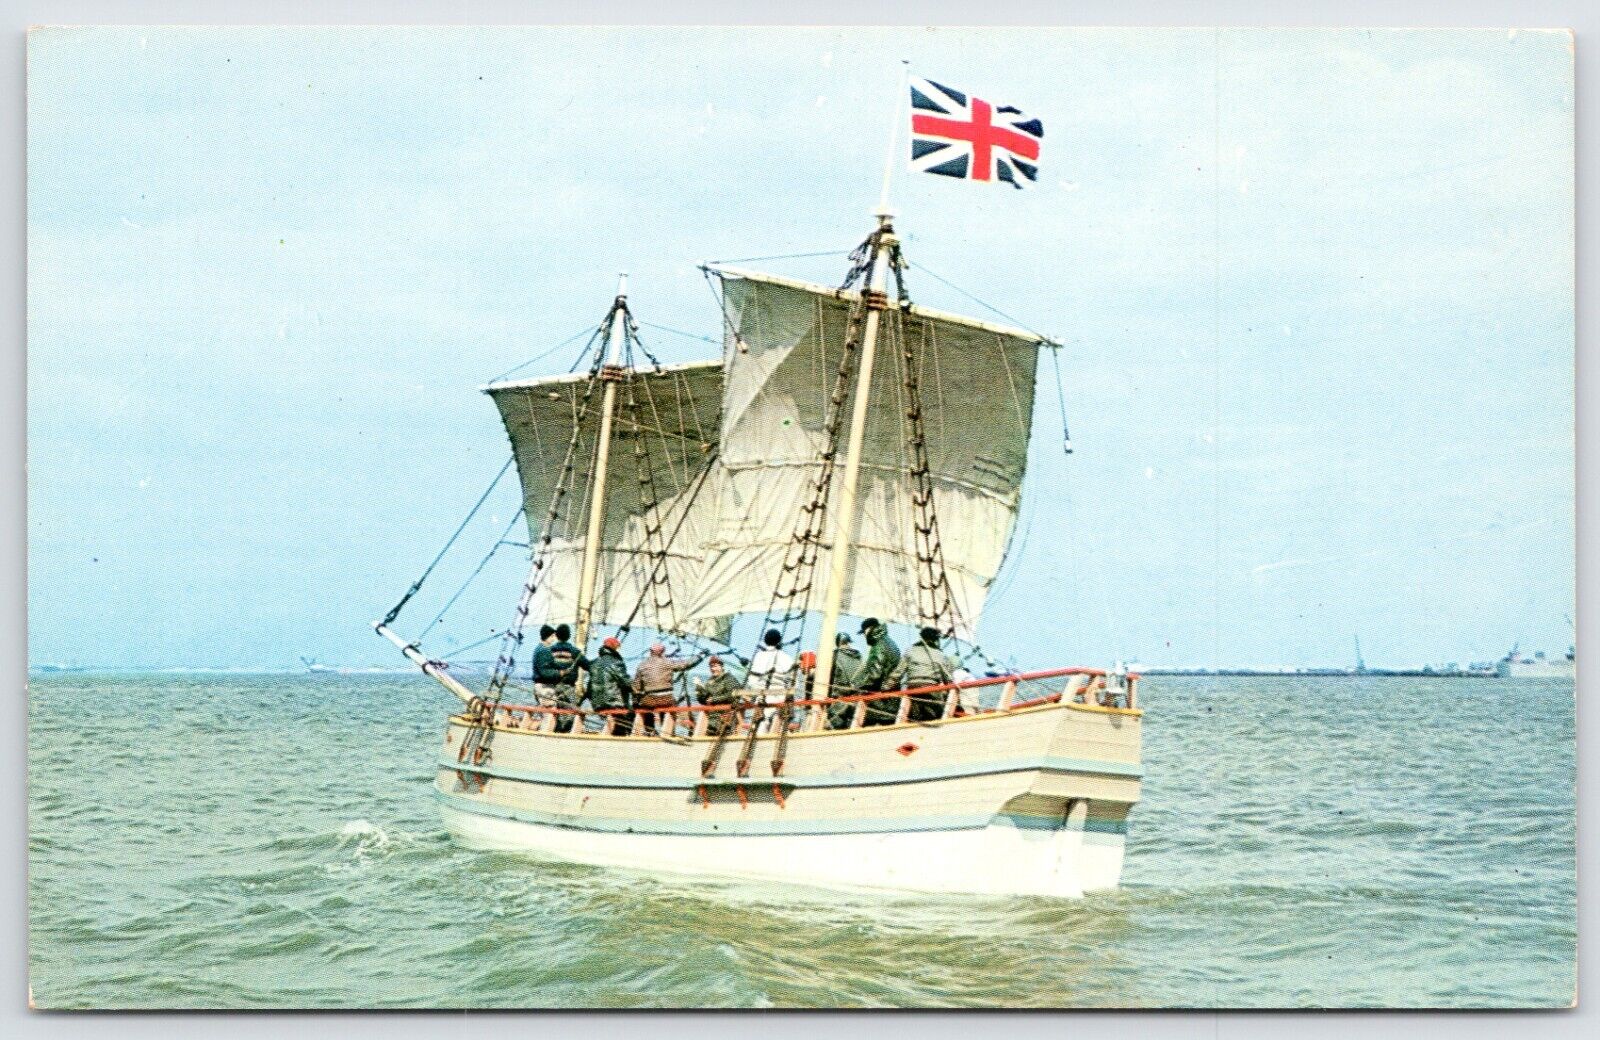 Postcard Discovery II, Ship Replica, Smallest Of The Three That Arrived Unposted